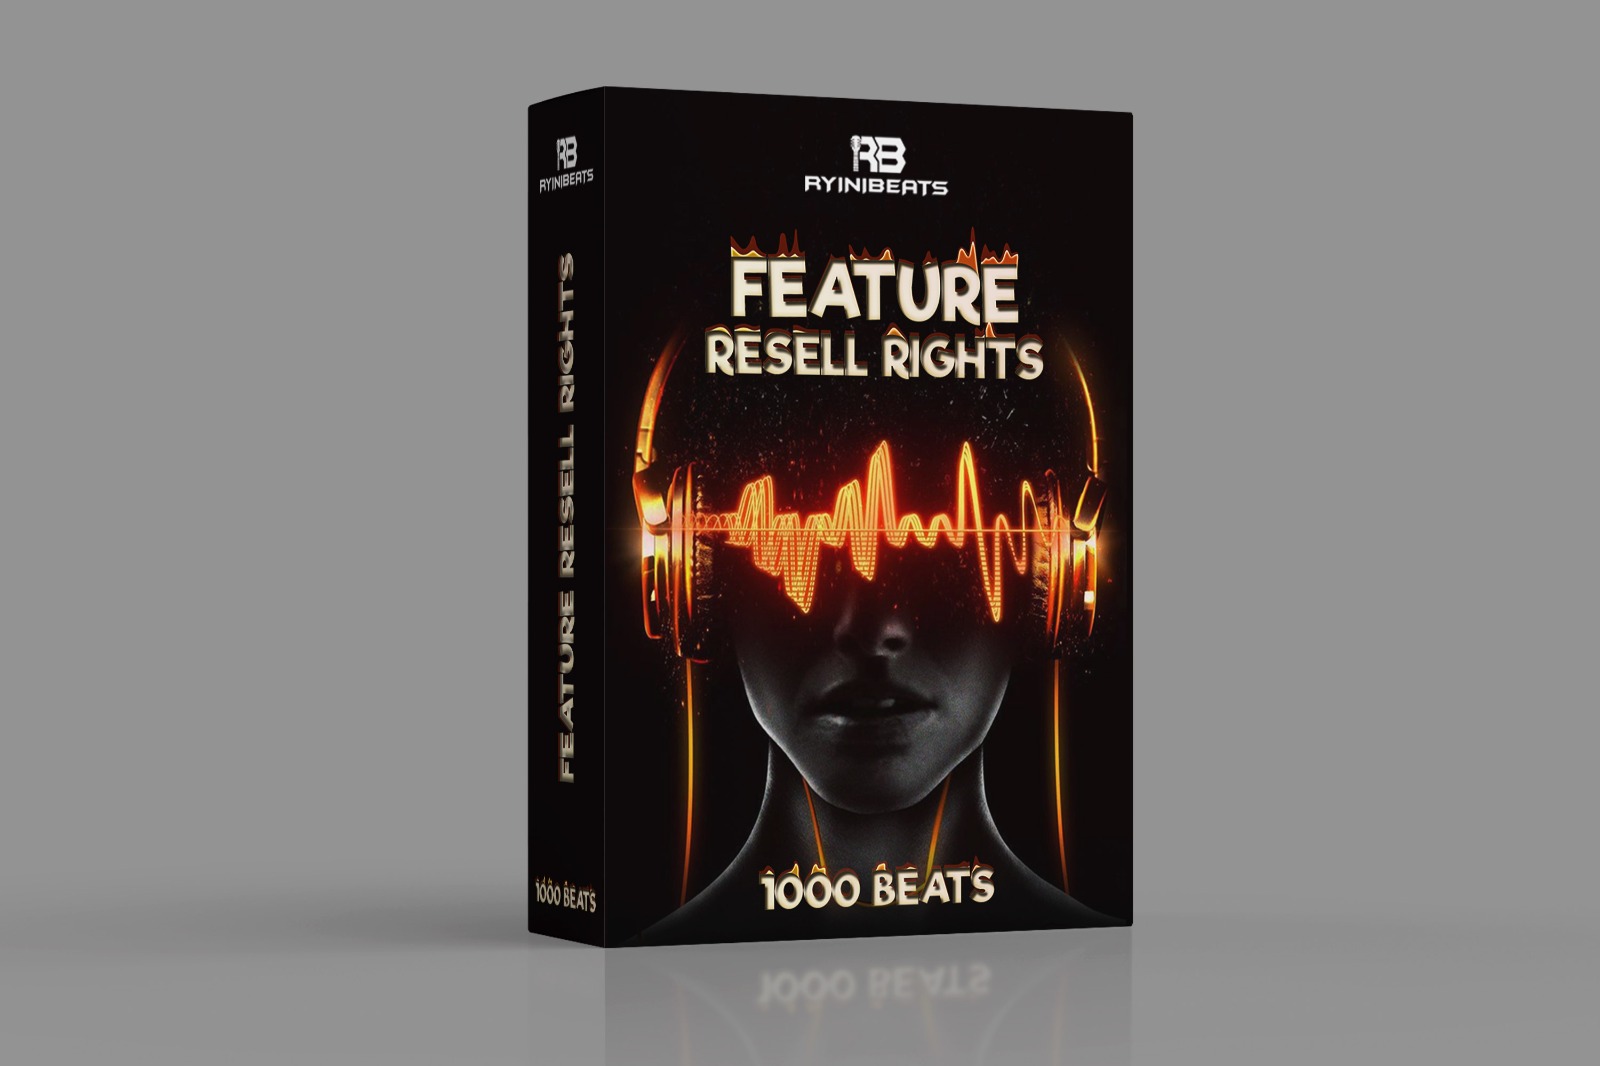 Feature Resell Rights (1,000 Beats)